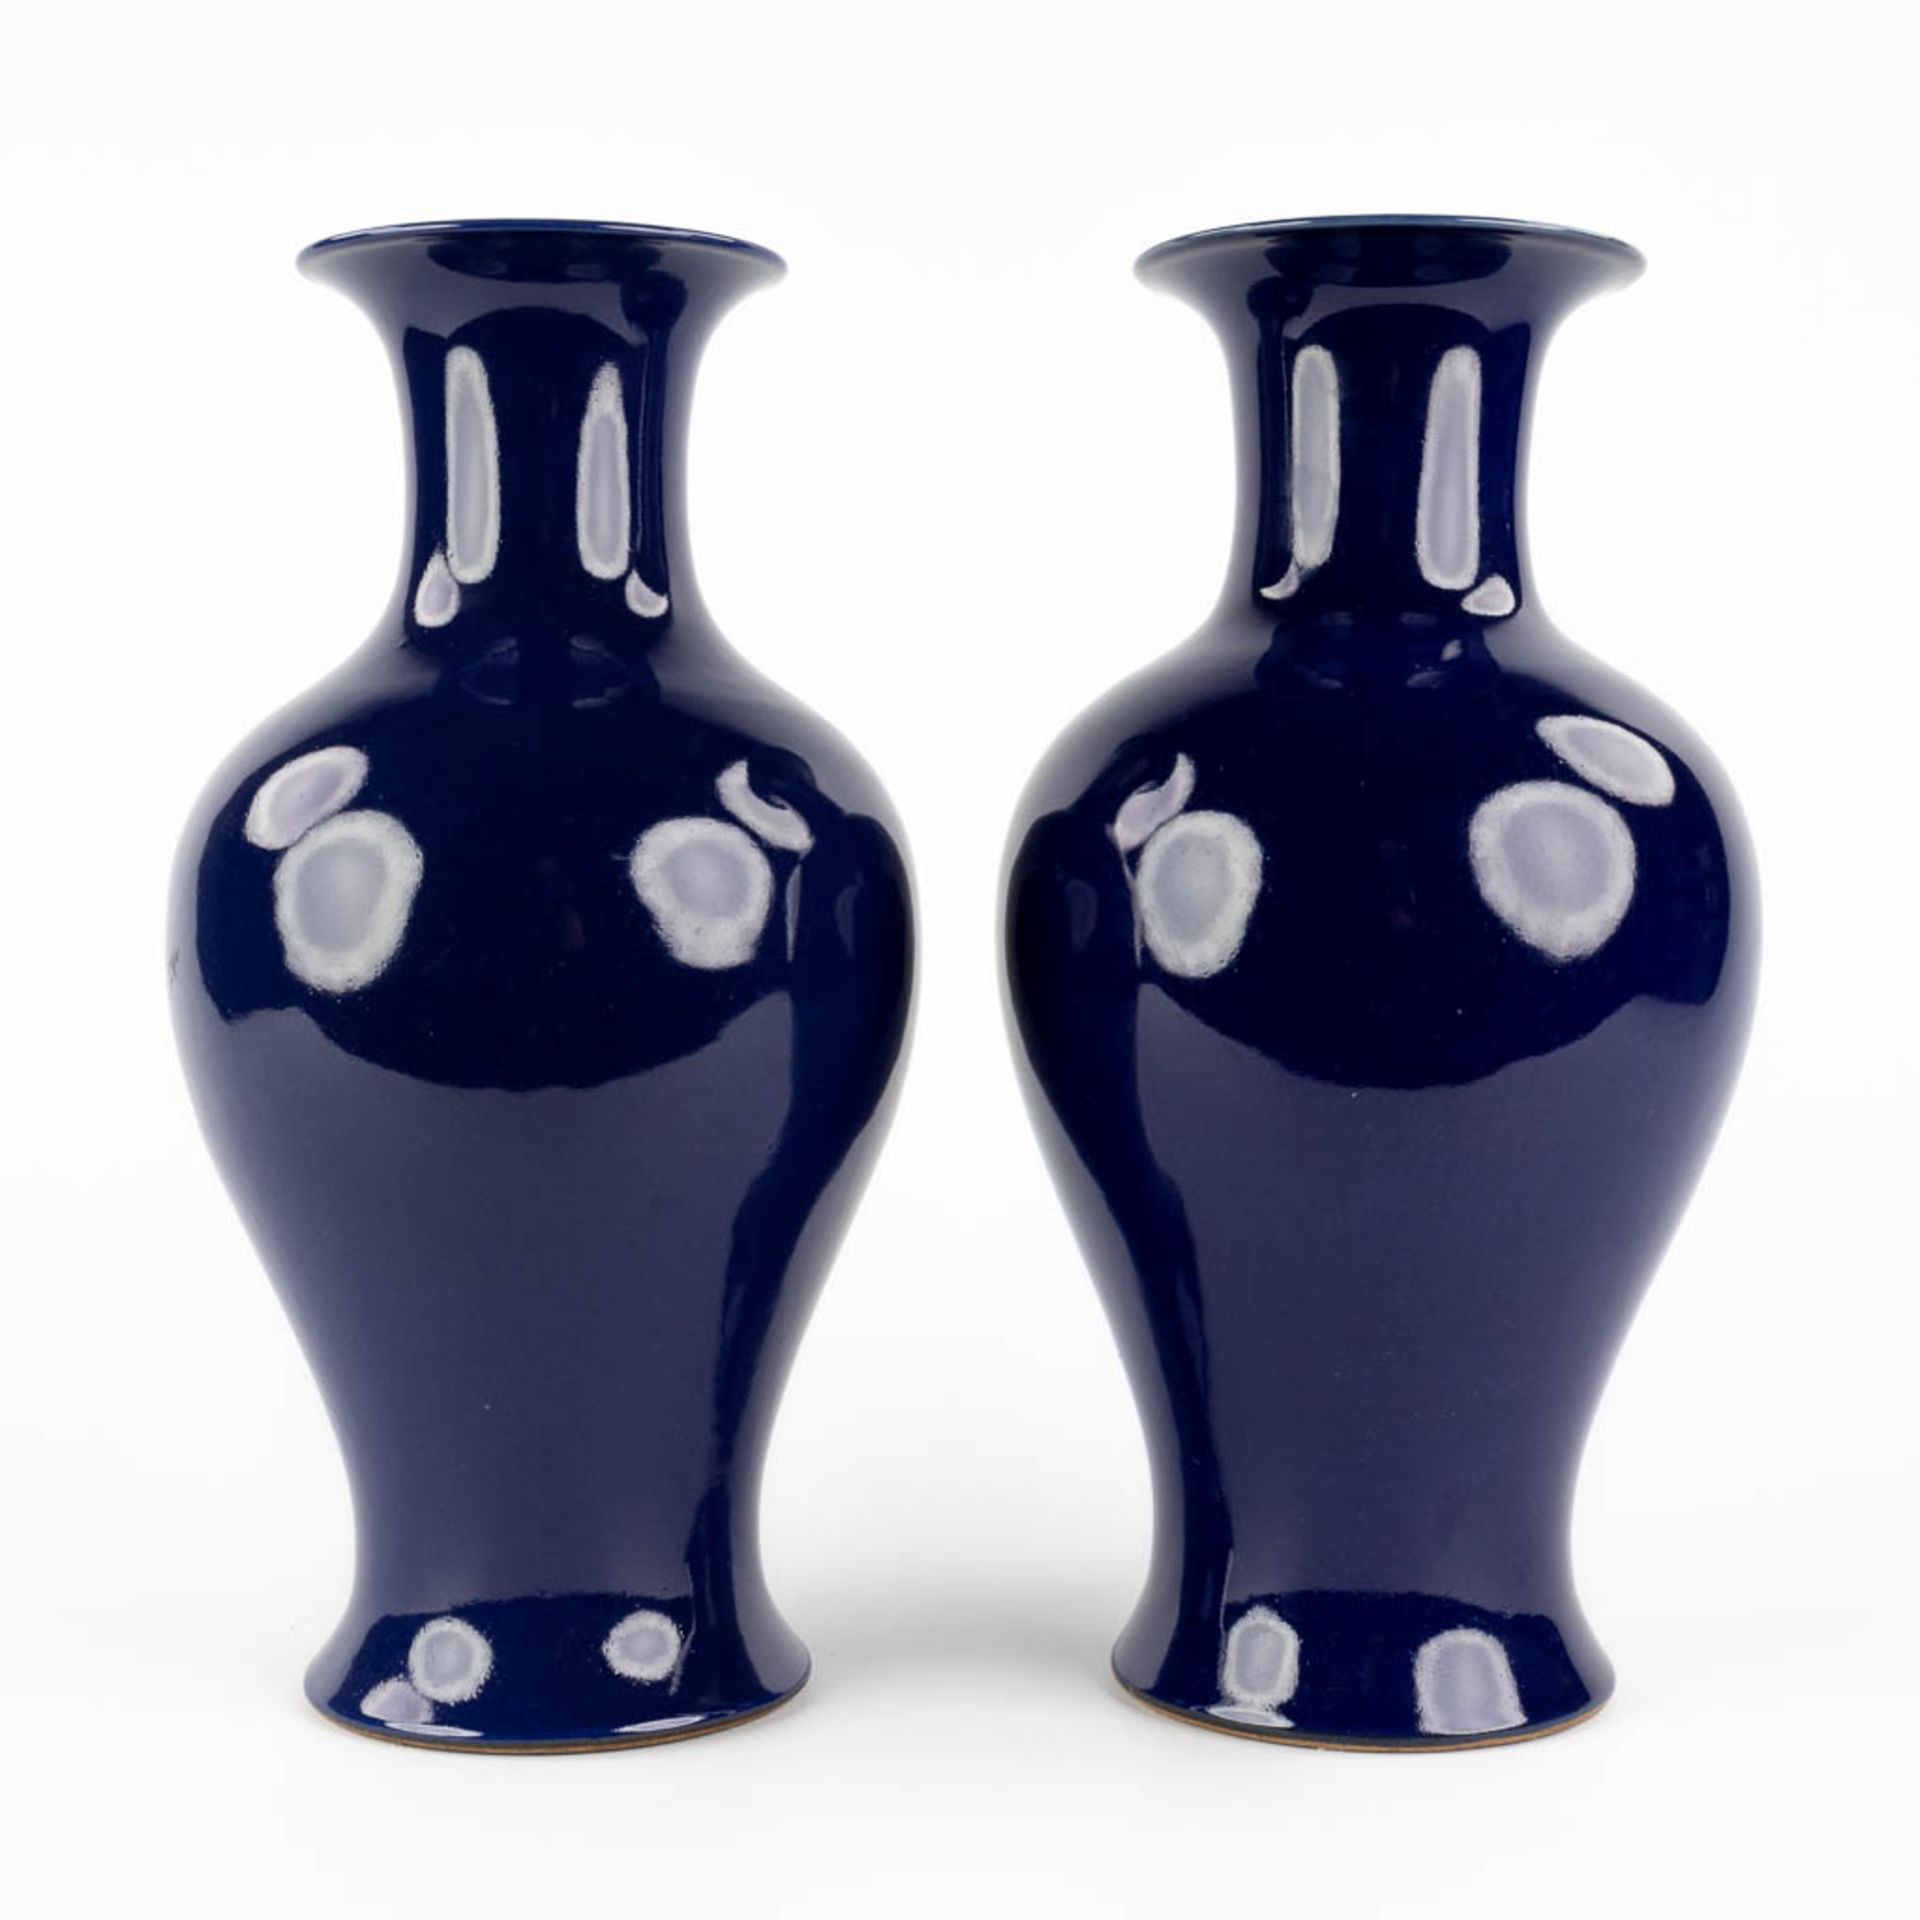 A pair of decorative Chinese blue-glazed vases. 20th C. (H:36 x D:18 cm) - Image 4 of 9